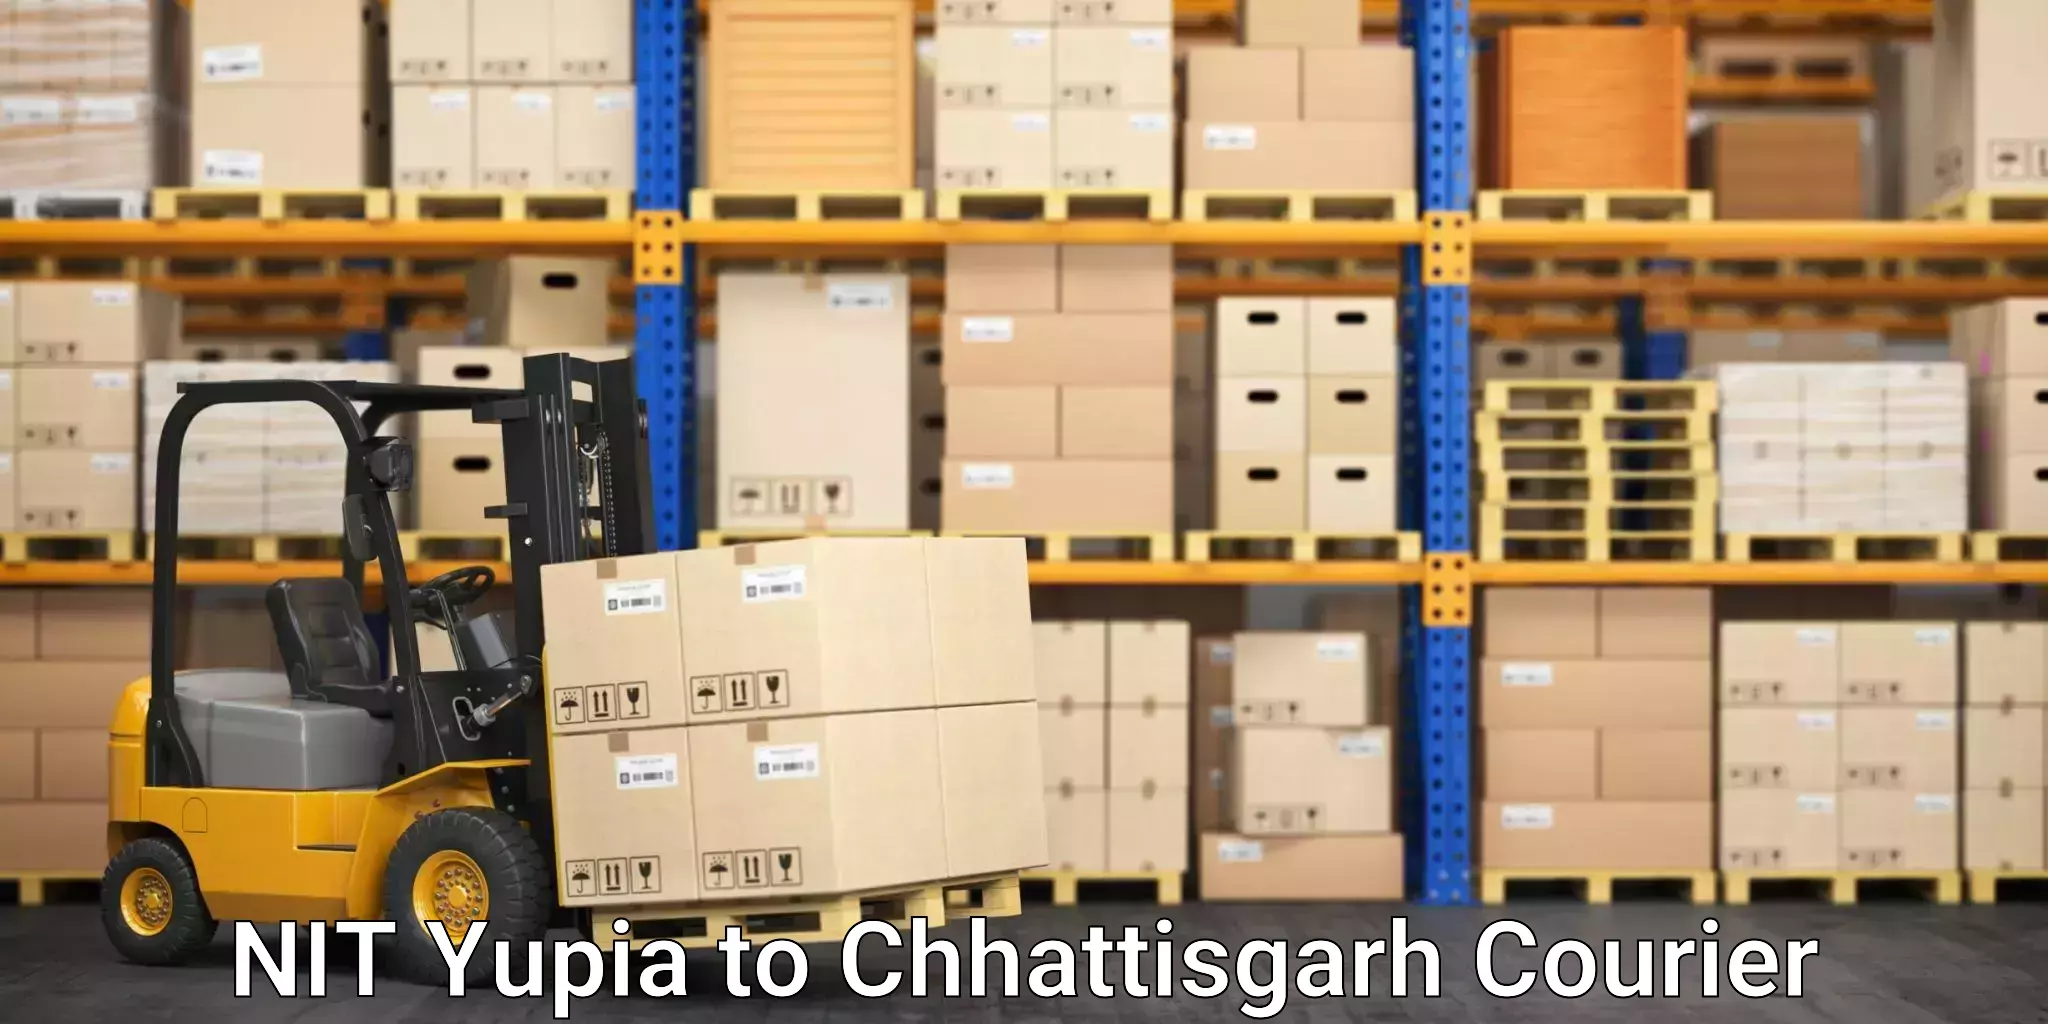 Express courier capabilities in NIT Yupia to Charama